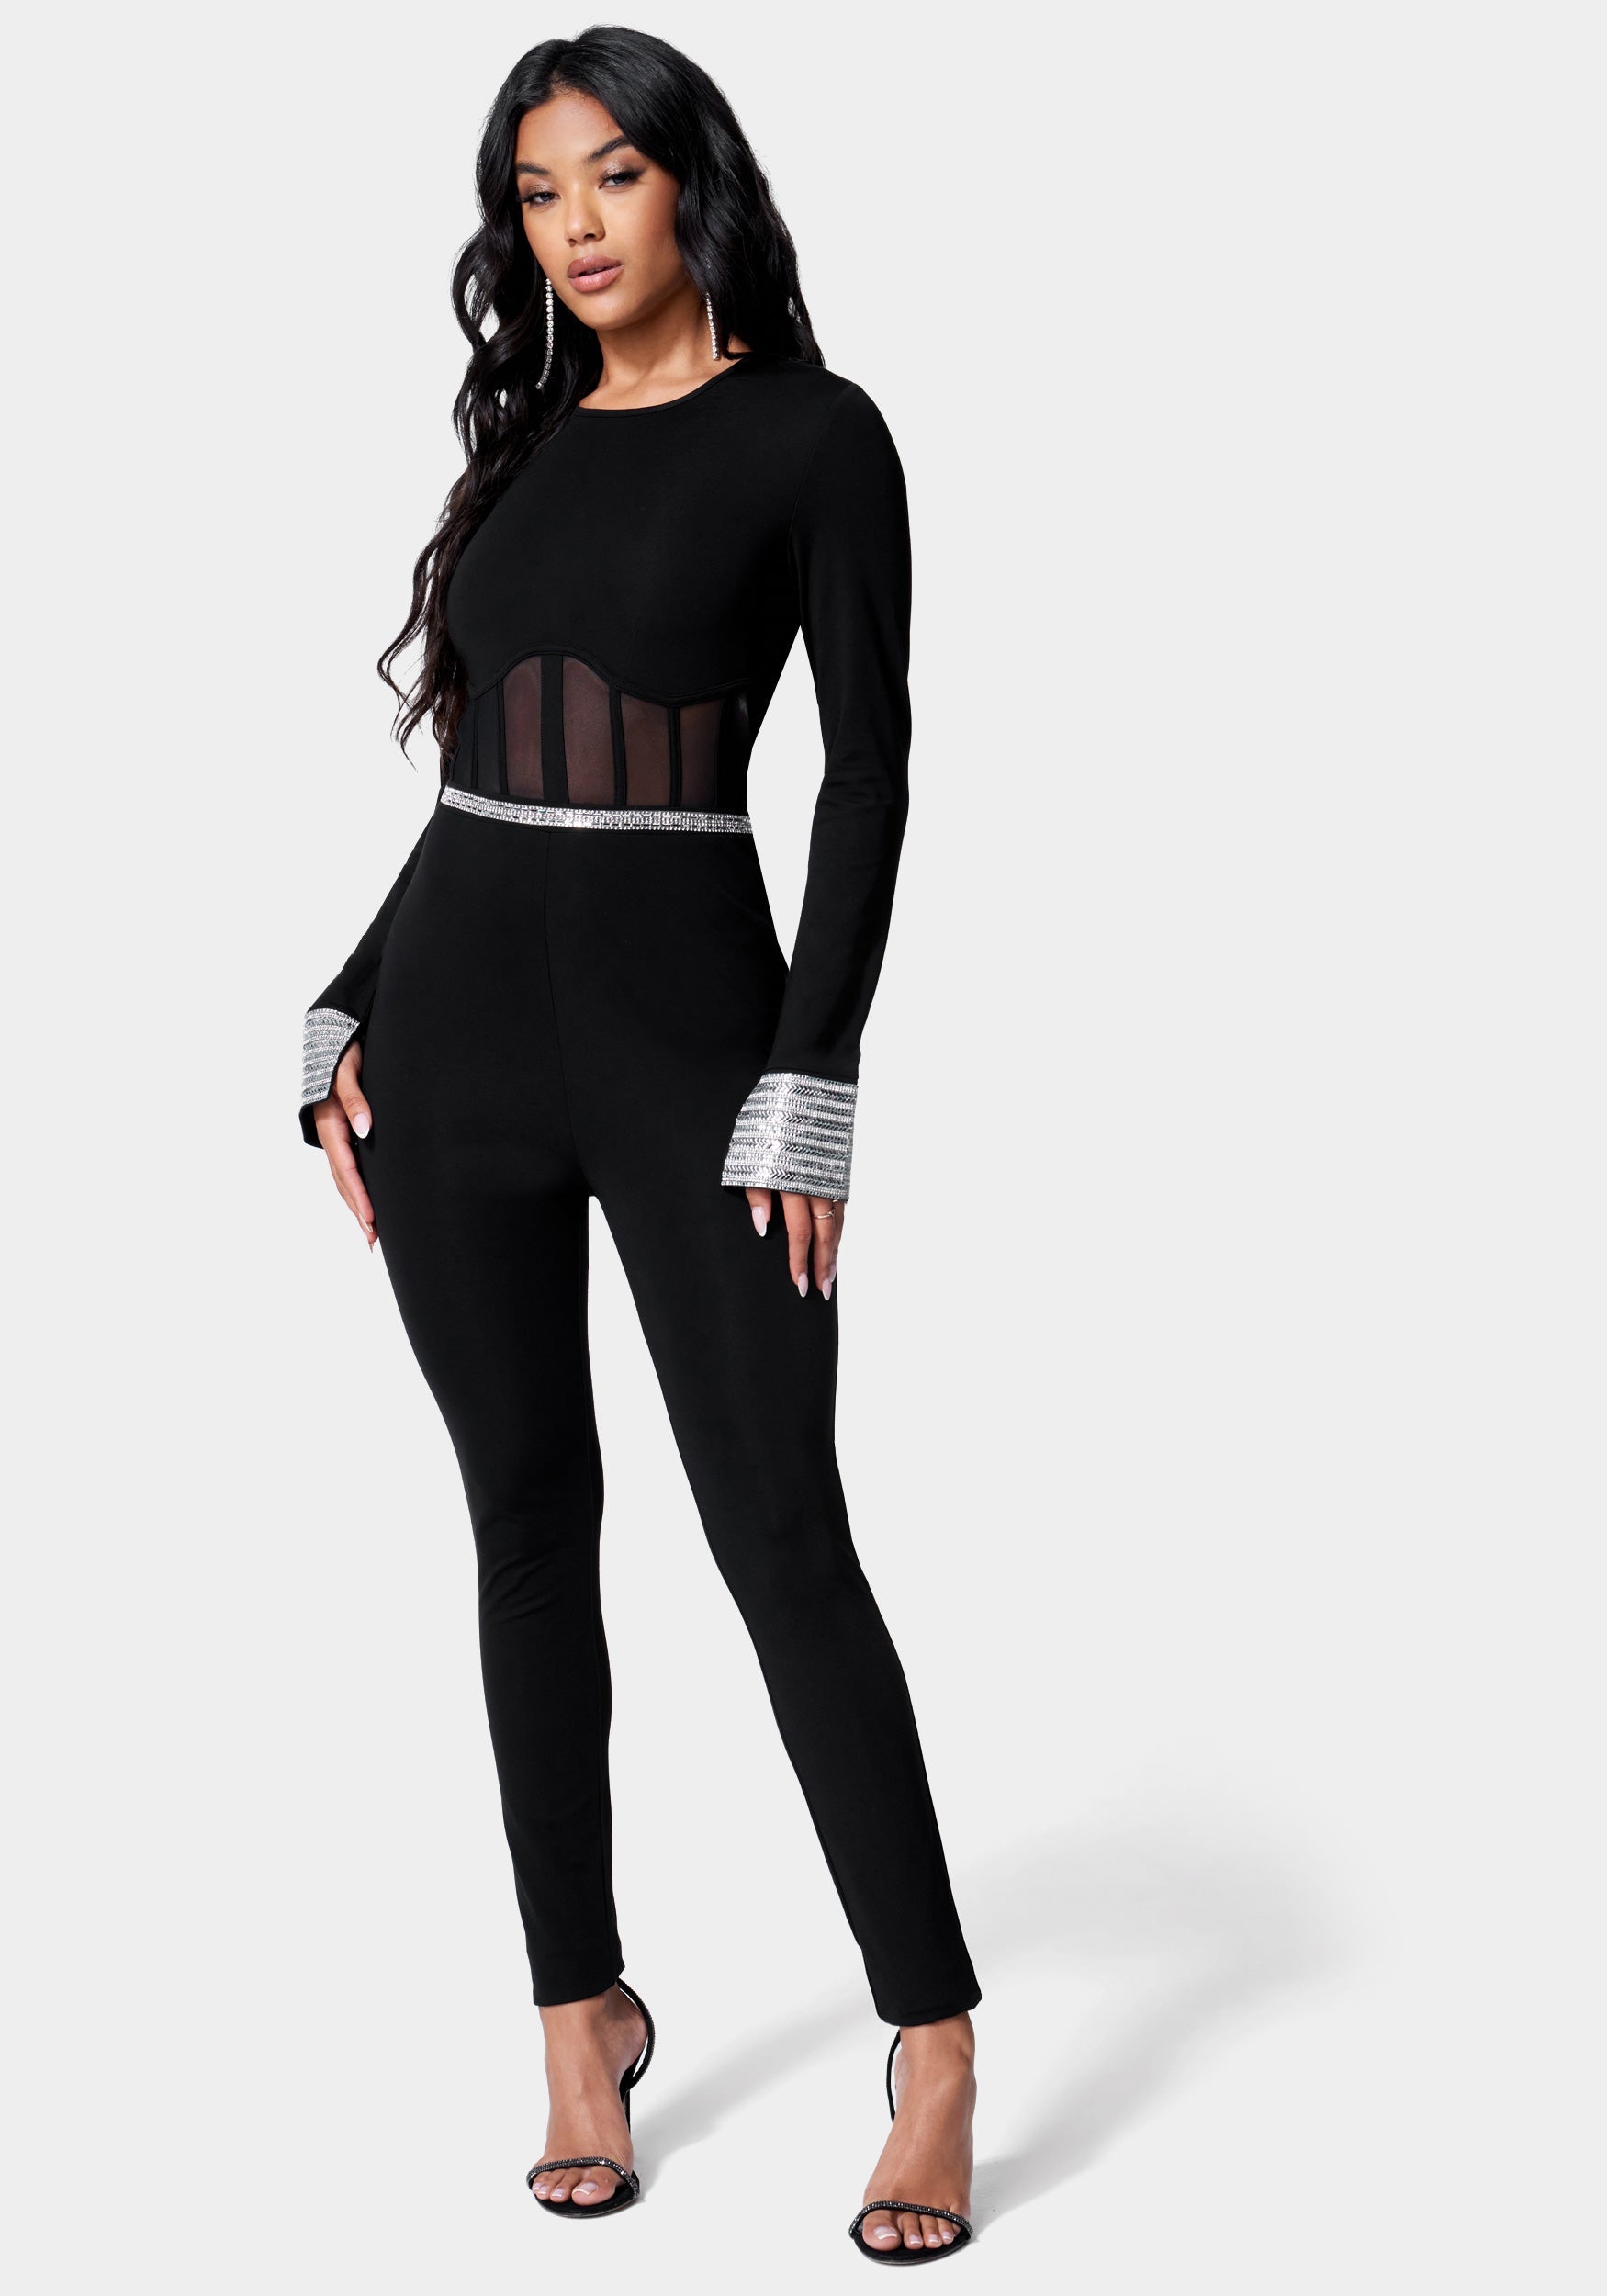 Embellished Corset Detail Catsuit - The Local Chirp